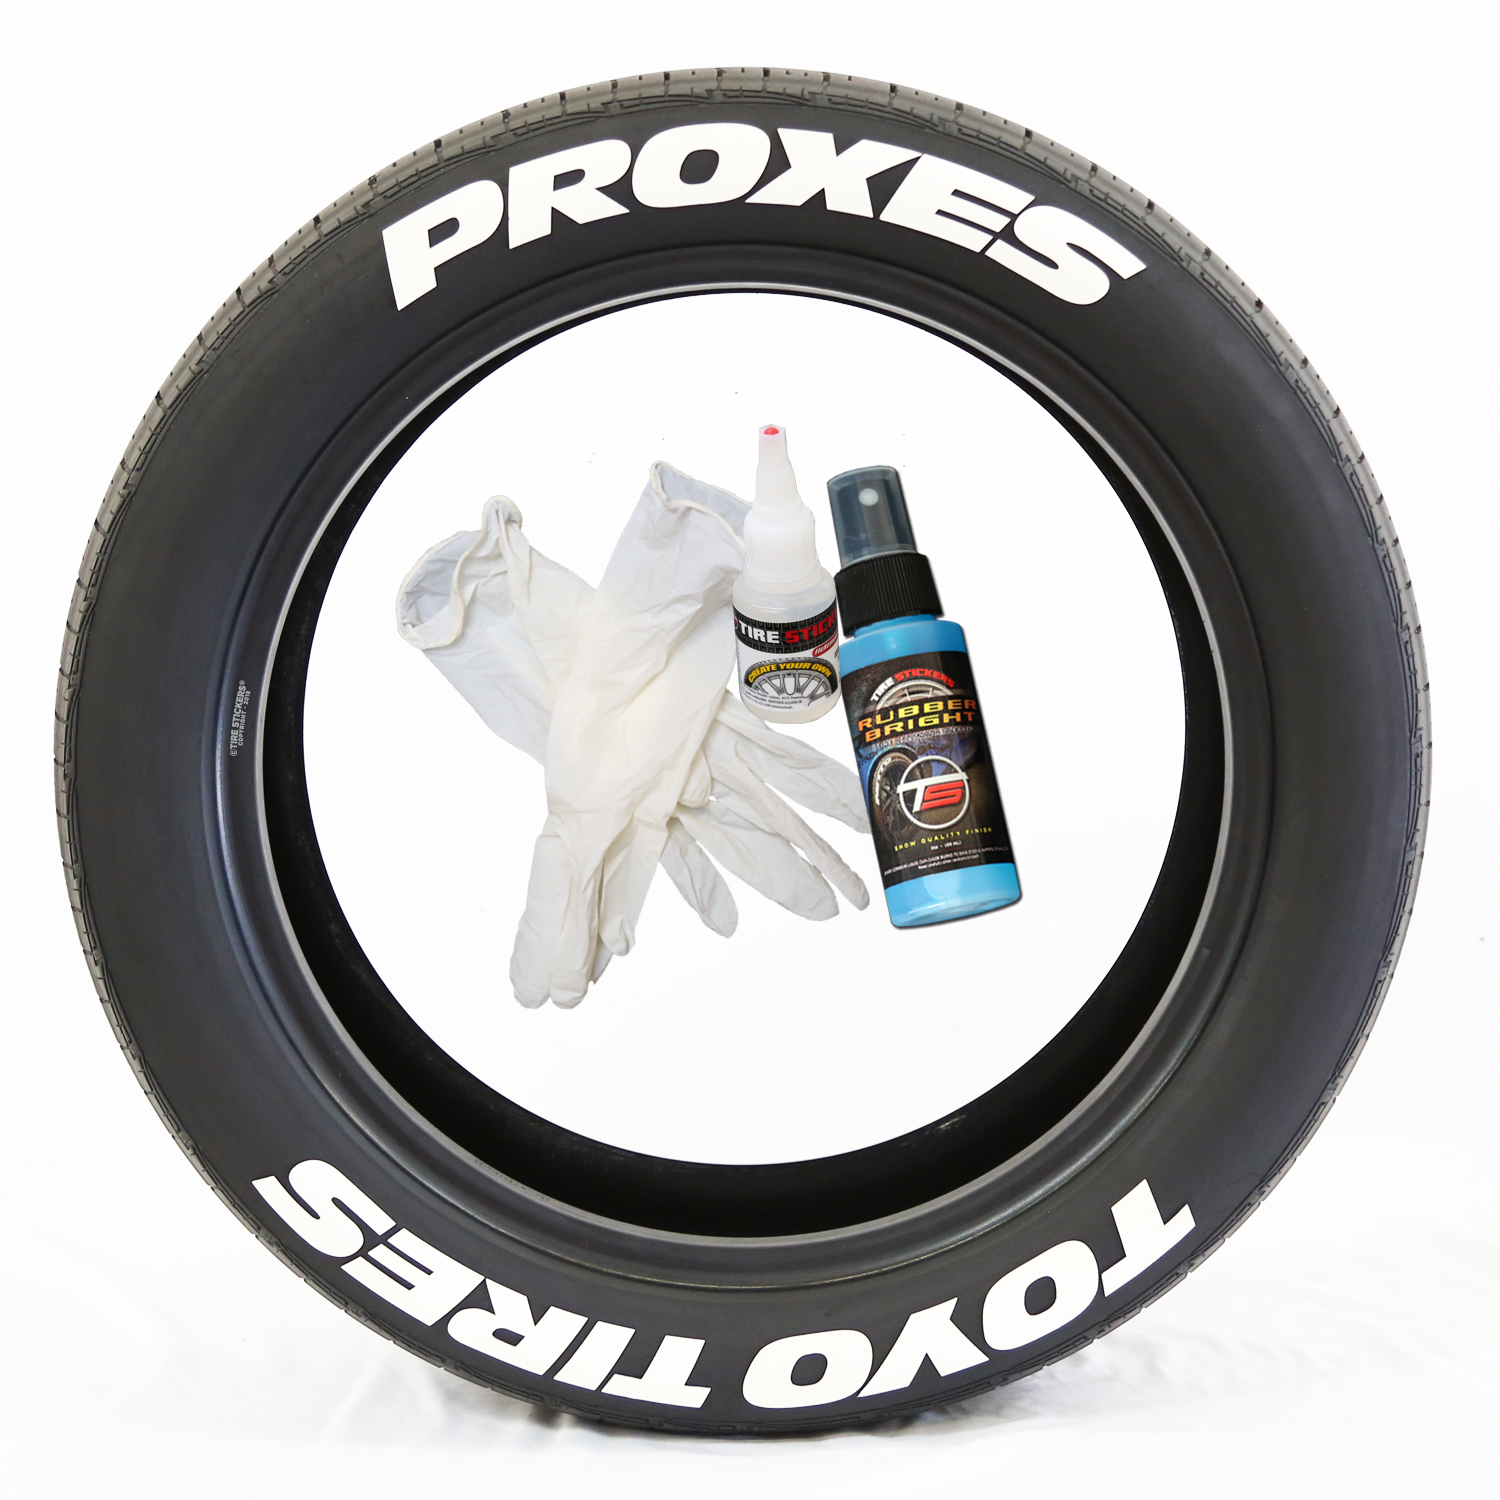 Toyo Tires Proxes Tire Lettering